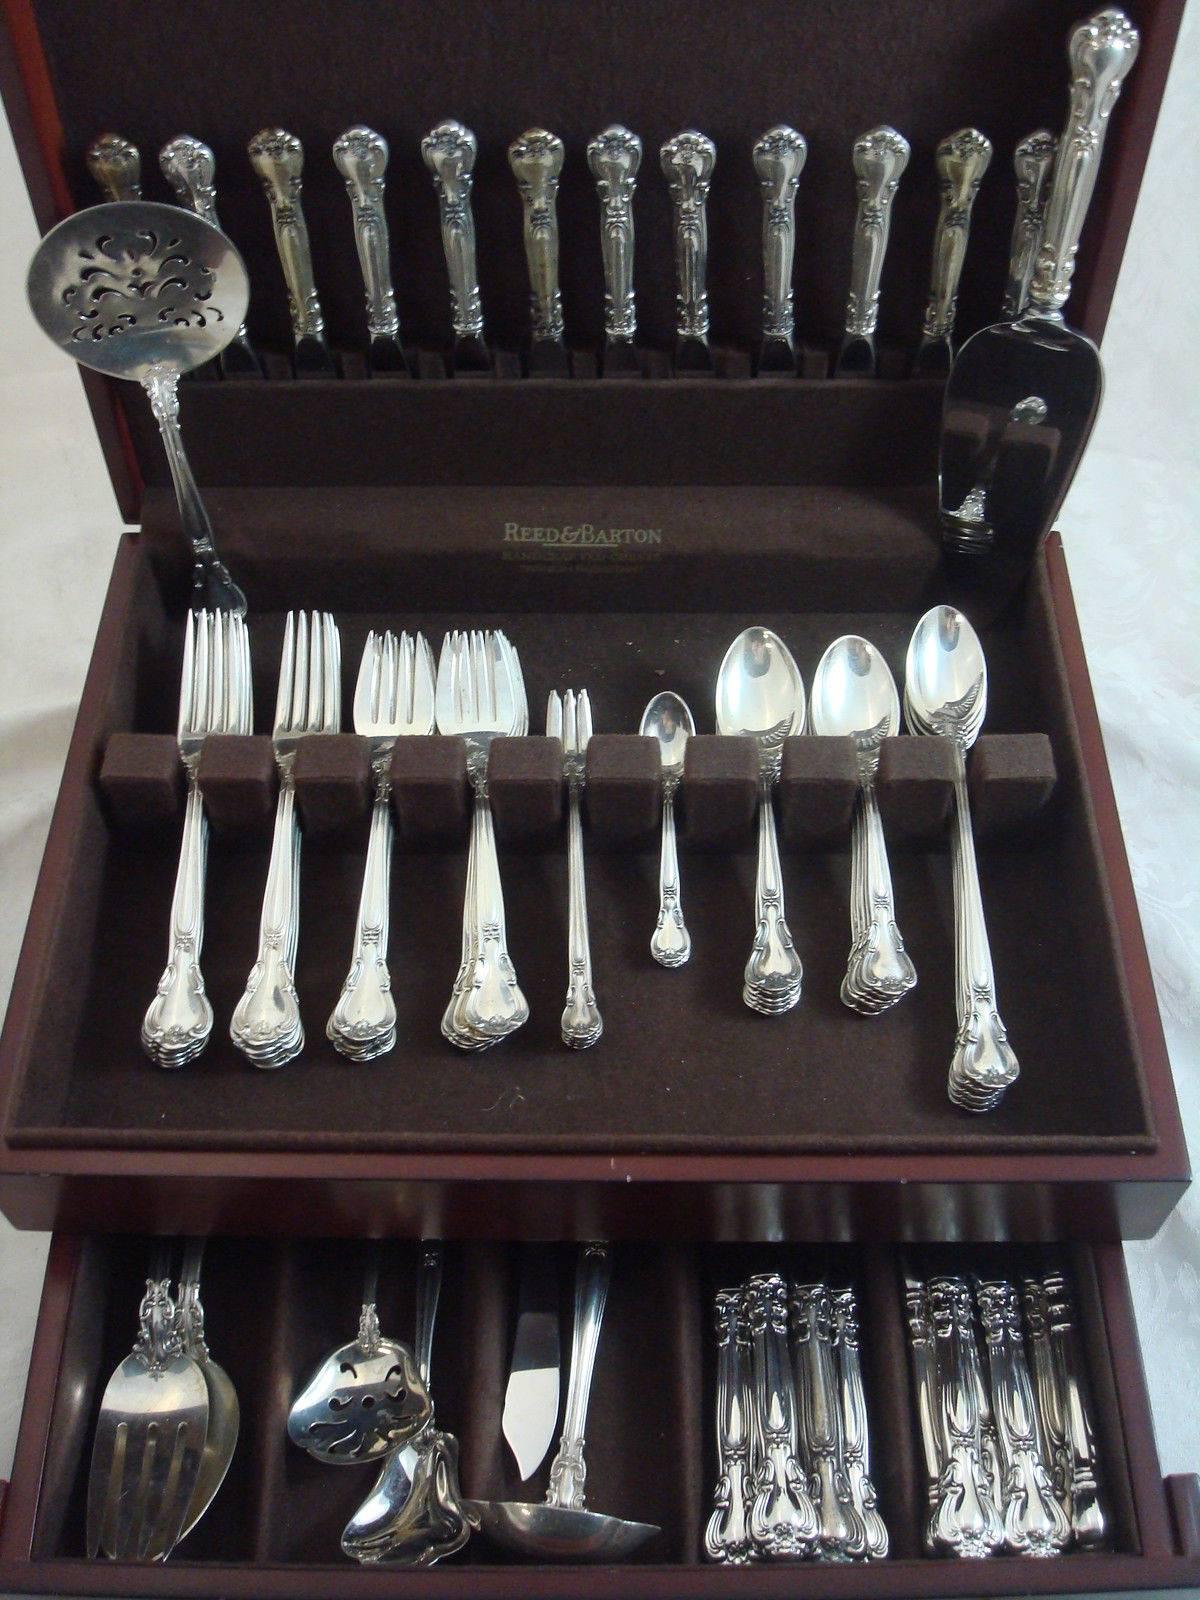 Chantilly BY Gorham sterling silver flatware set, 108 pieces. This set includes: 

12 knives modern, 8 7/8